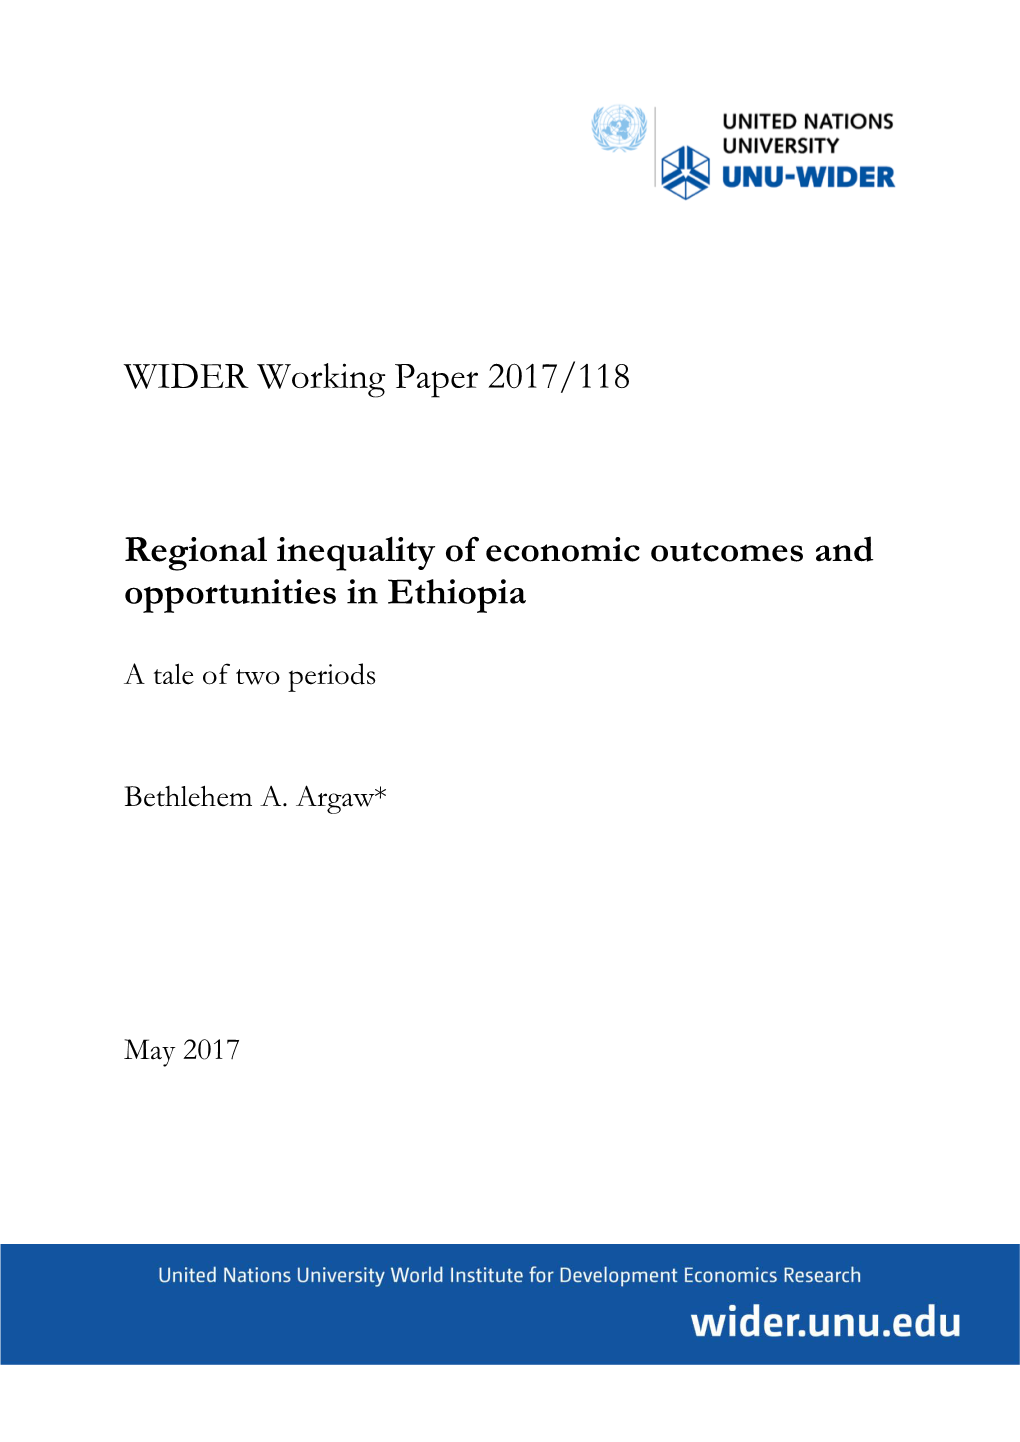 Regional Inequality of Economic Outcomes and Opportunities in Ethiopia